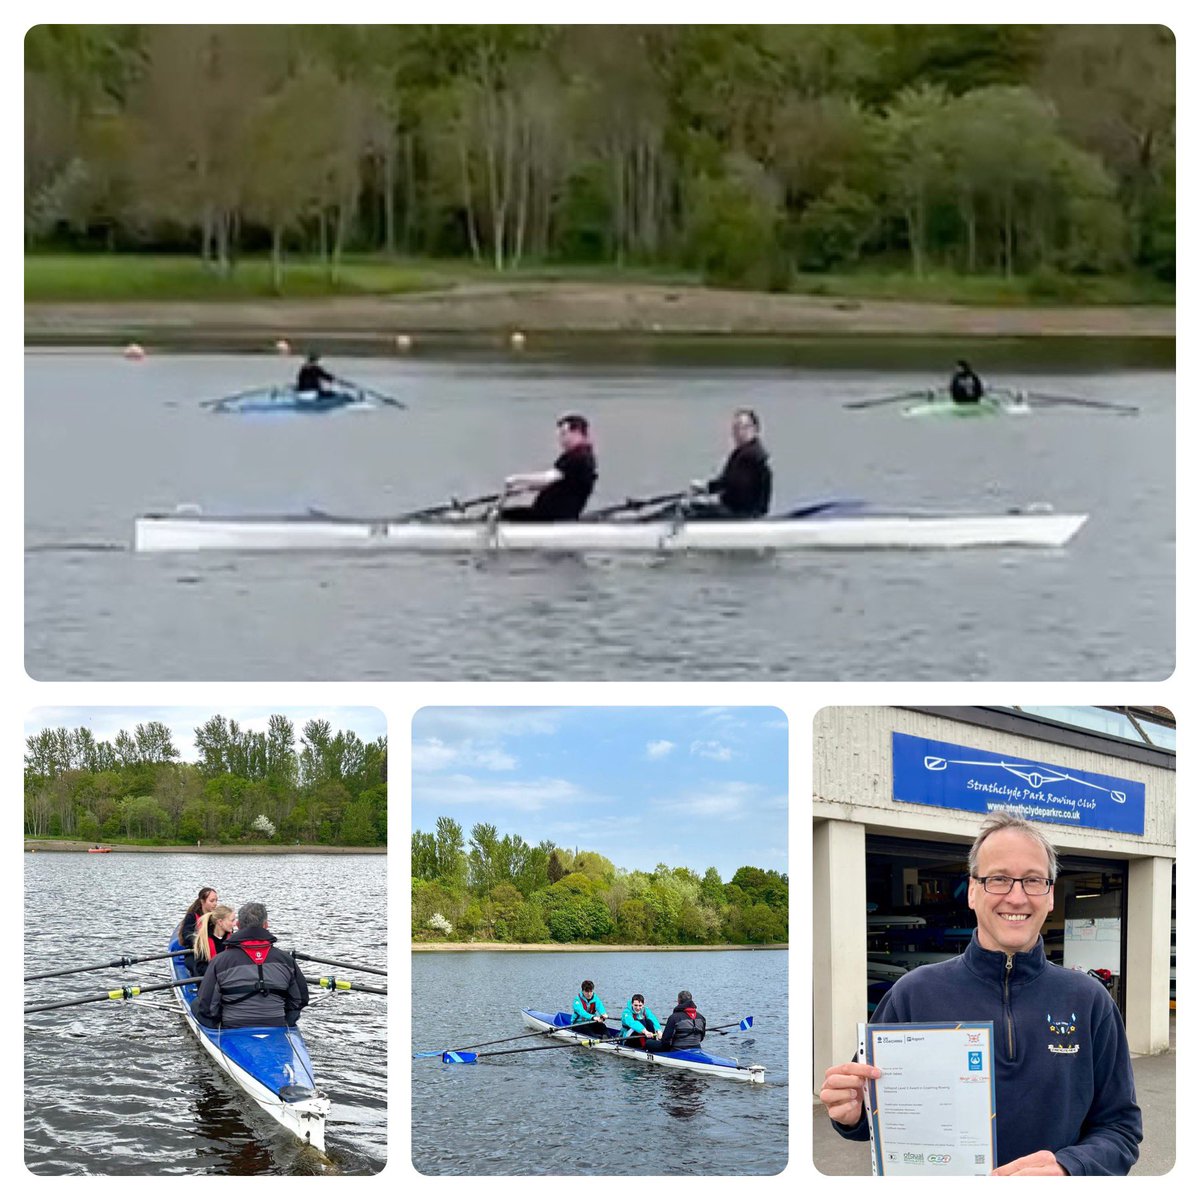 Lots to celebrate at our latest #CommunityRowing sessions. Ulrich got his coaching award 👏 & there was loads of confidence & skills building as our talented squads from @FPSMotherwell @BellshillA progressed into crew boats @SP_RC1 @NLActiveSchools @ScottishRowing @active_nl